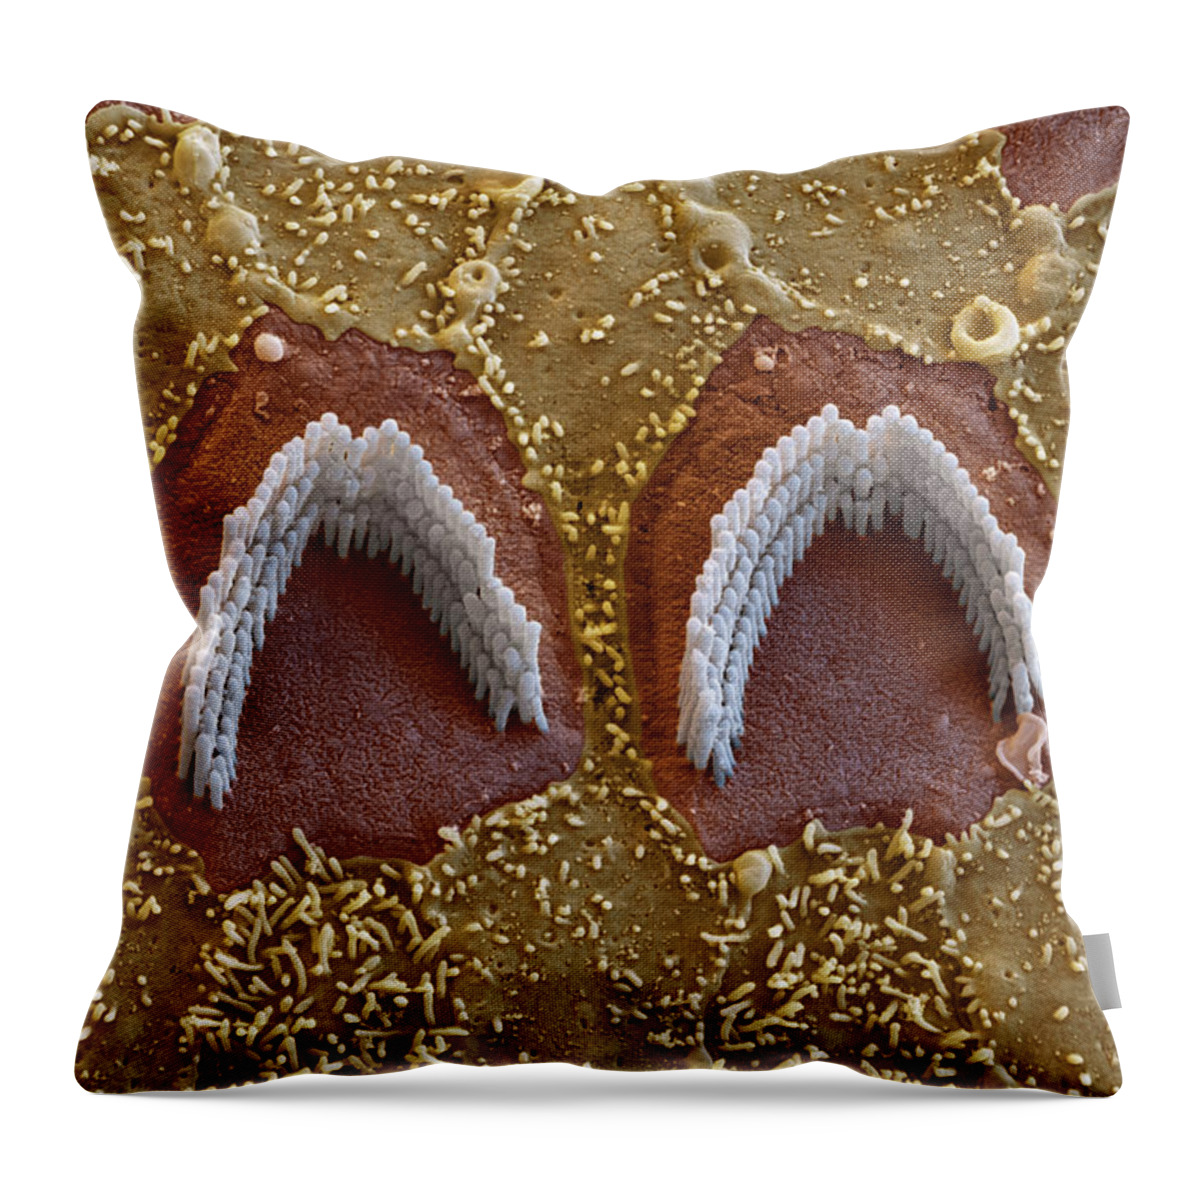 Cochlea Throw Pillow featuring the photograph Cochlea, Outer Hair Cells, Sem #21 by Oliver Meckes EYE OF SCIENCE